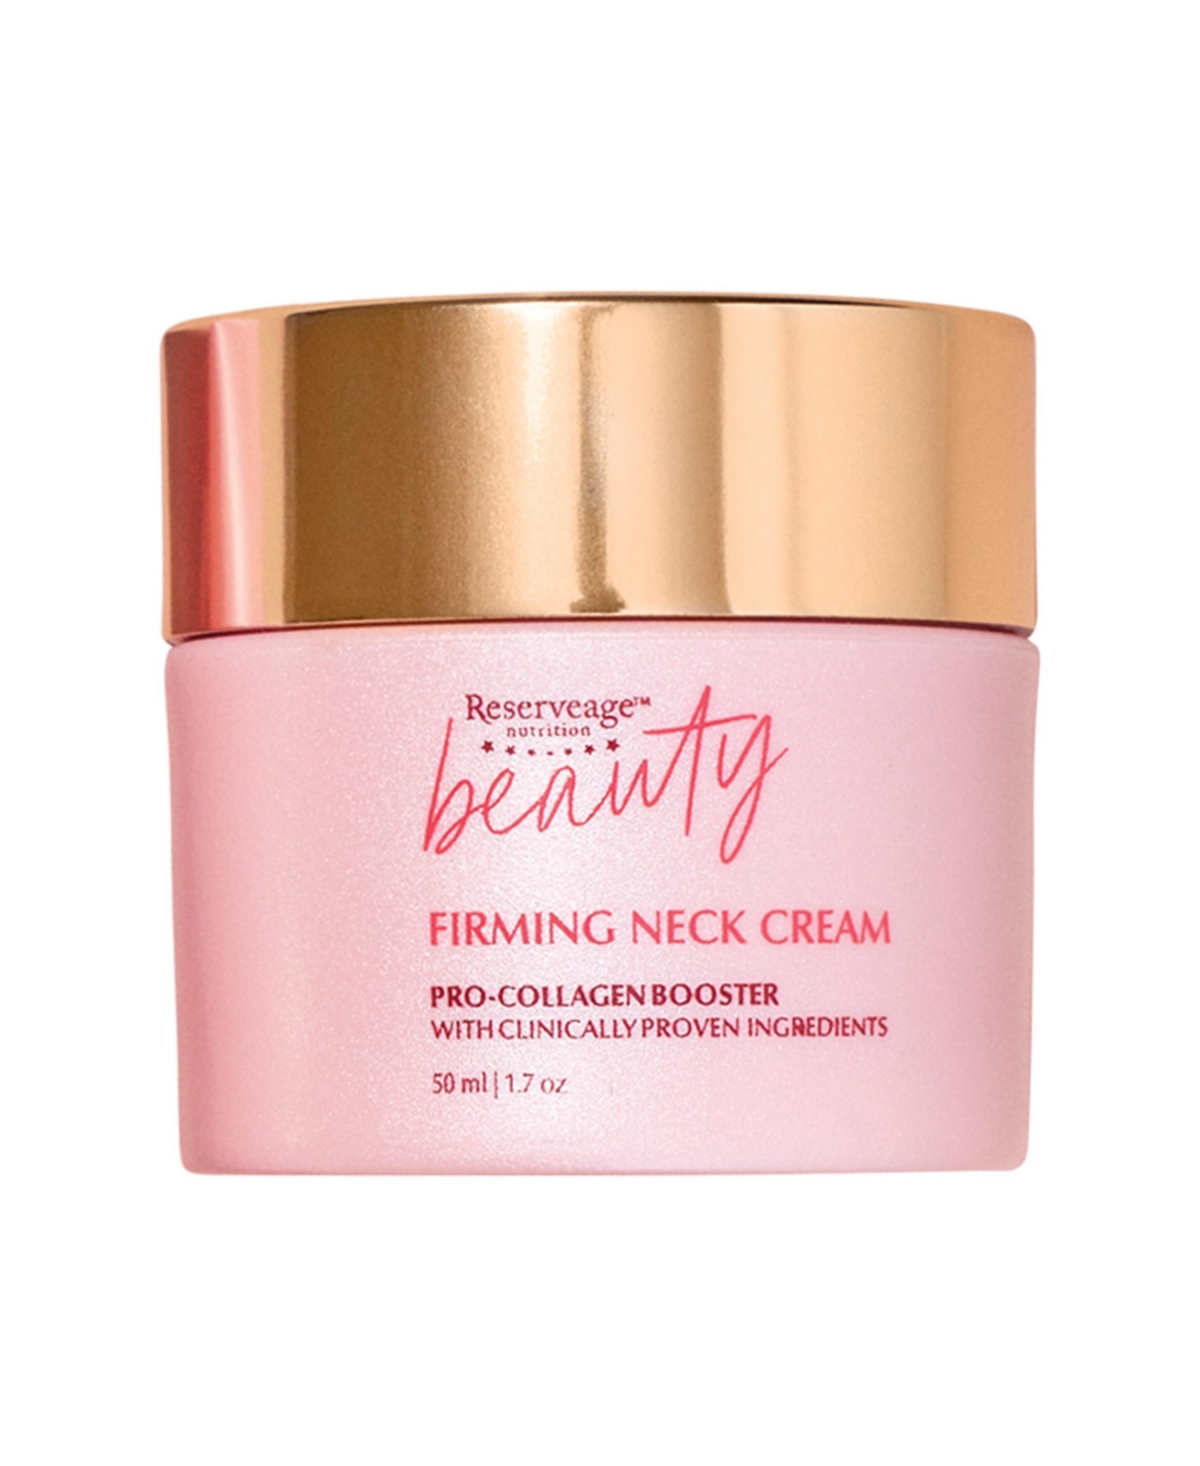 Beauty, Firming Neck Cream with Pro-Collagen Booster, Tights, Smooths and Moisturizes with Micro-Encapsulated Copper Peptides and Measurabl